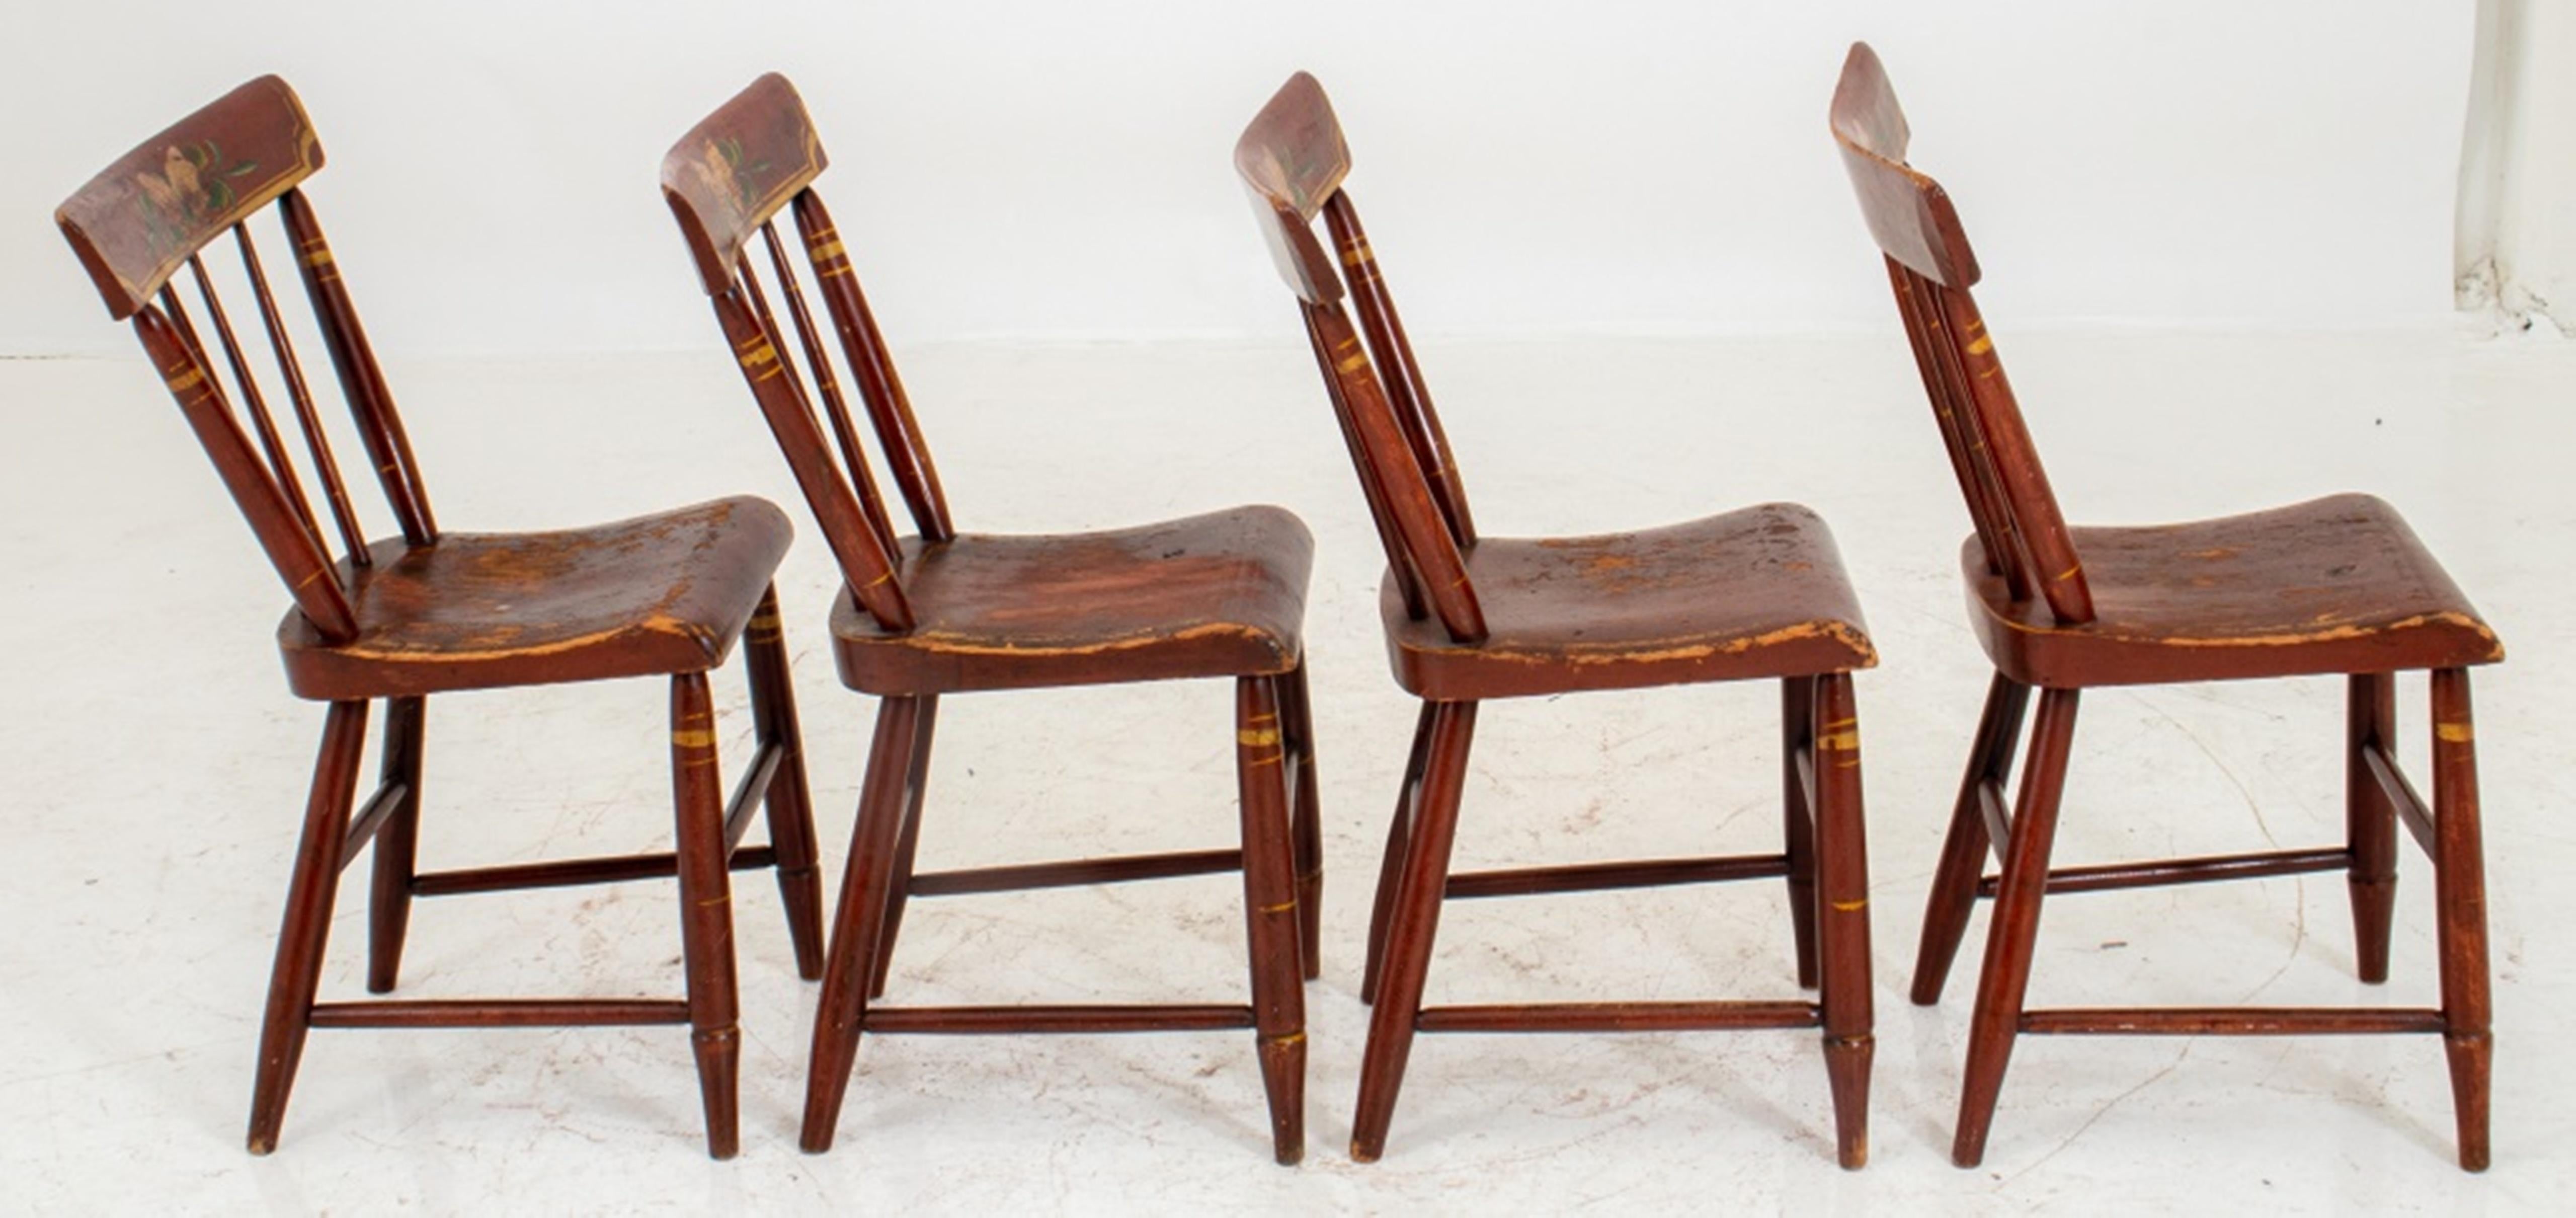 Unknown American Folk Art Style Chairs, 4